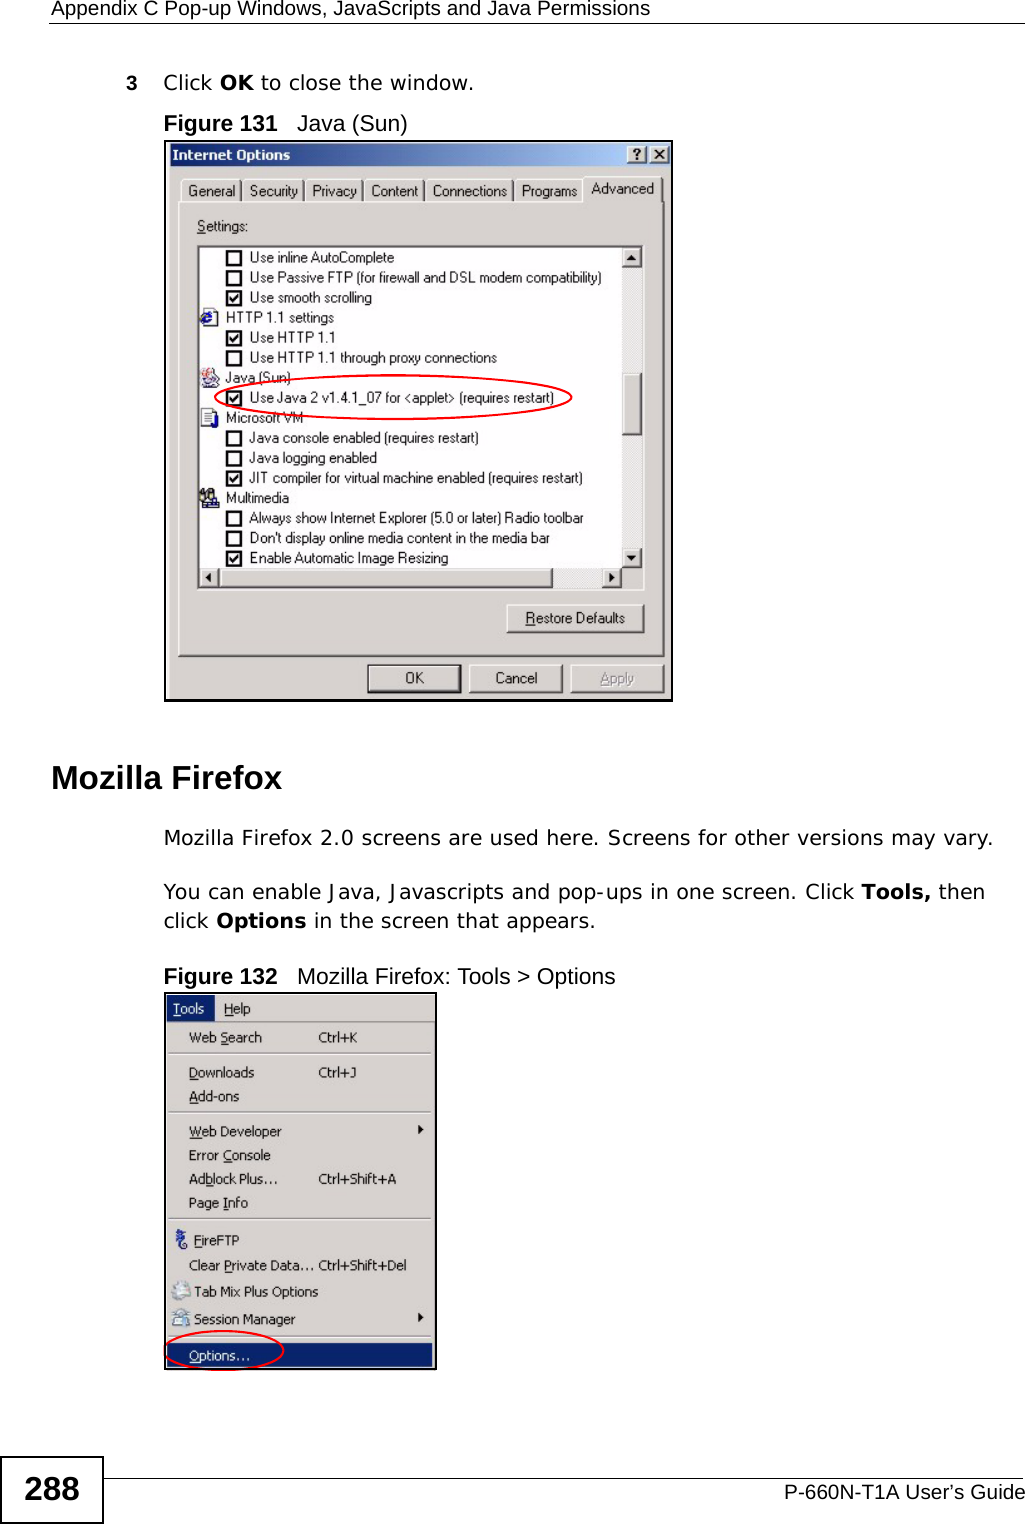 Appendix C Pop-up Windows, JavaScripts and Java PermissionsP-660N-T1A User’s Guide2883Click OK to close the window.Figure 131   Java (Sun)Mozilla FirefoxMozilla Firefox 2.0 screens are used here. Screens for other versions may vary. You can enable Java, Javascripts and pop-ups in one screen. Click Tools, then click Options in the screen that appears.Figure 132   Mozilla Firefox: Tools &gt; Options